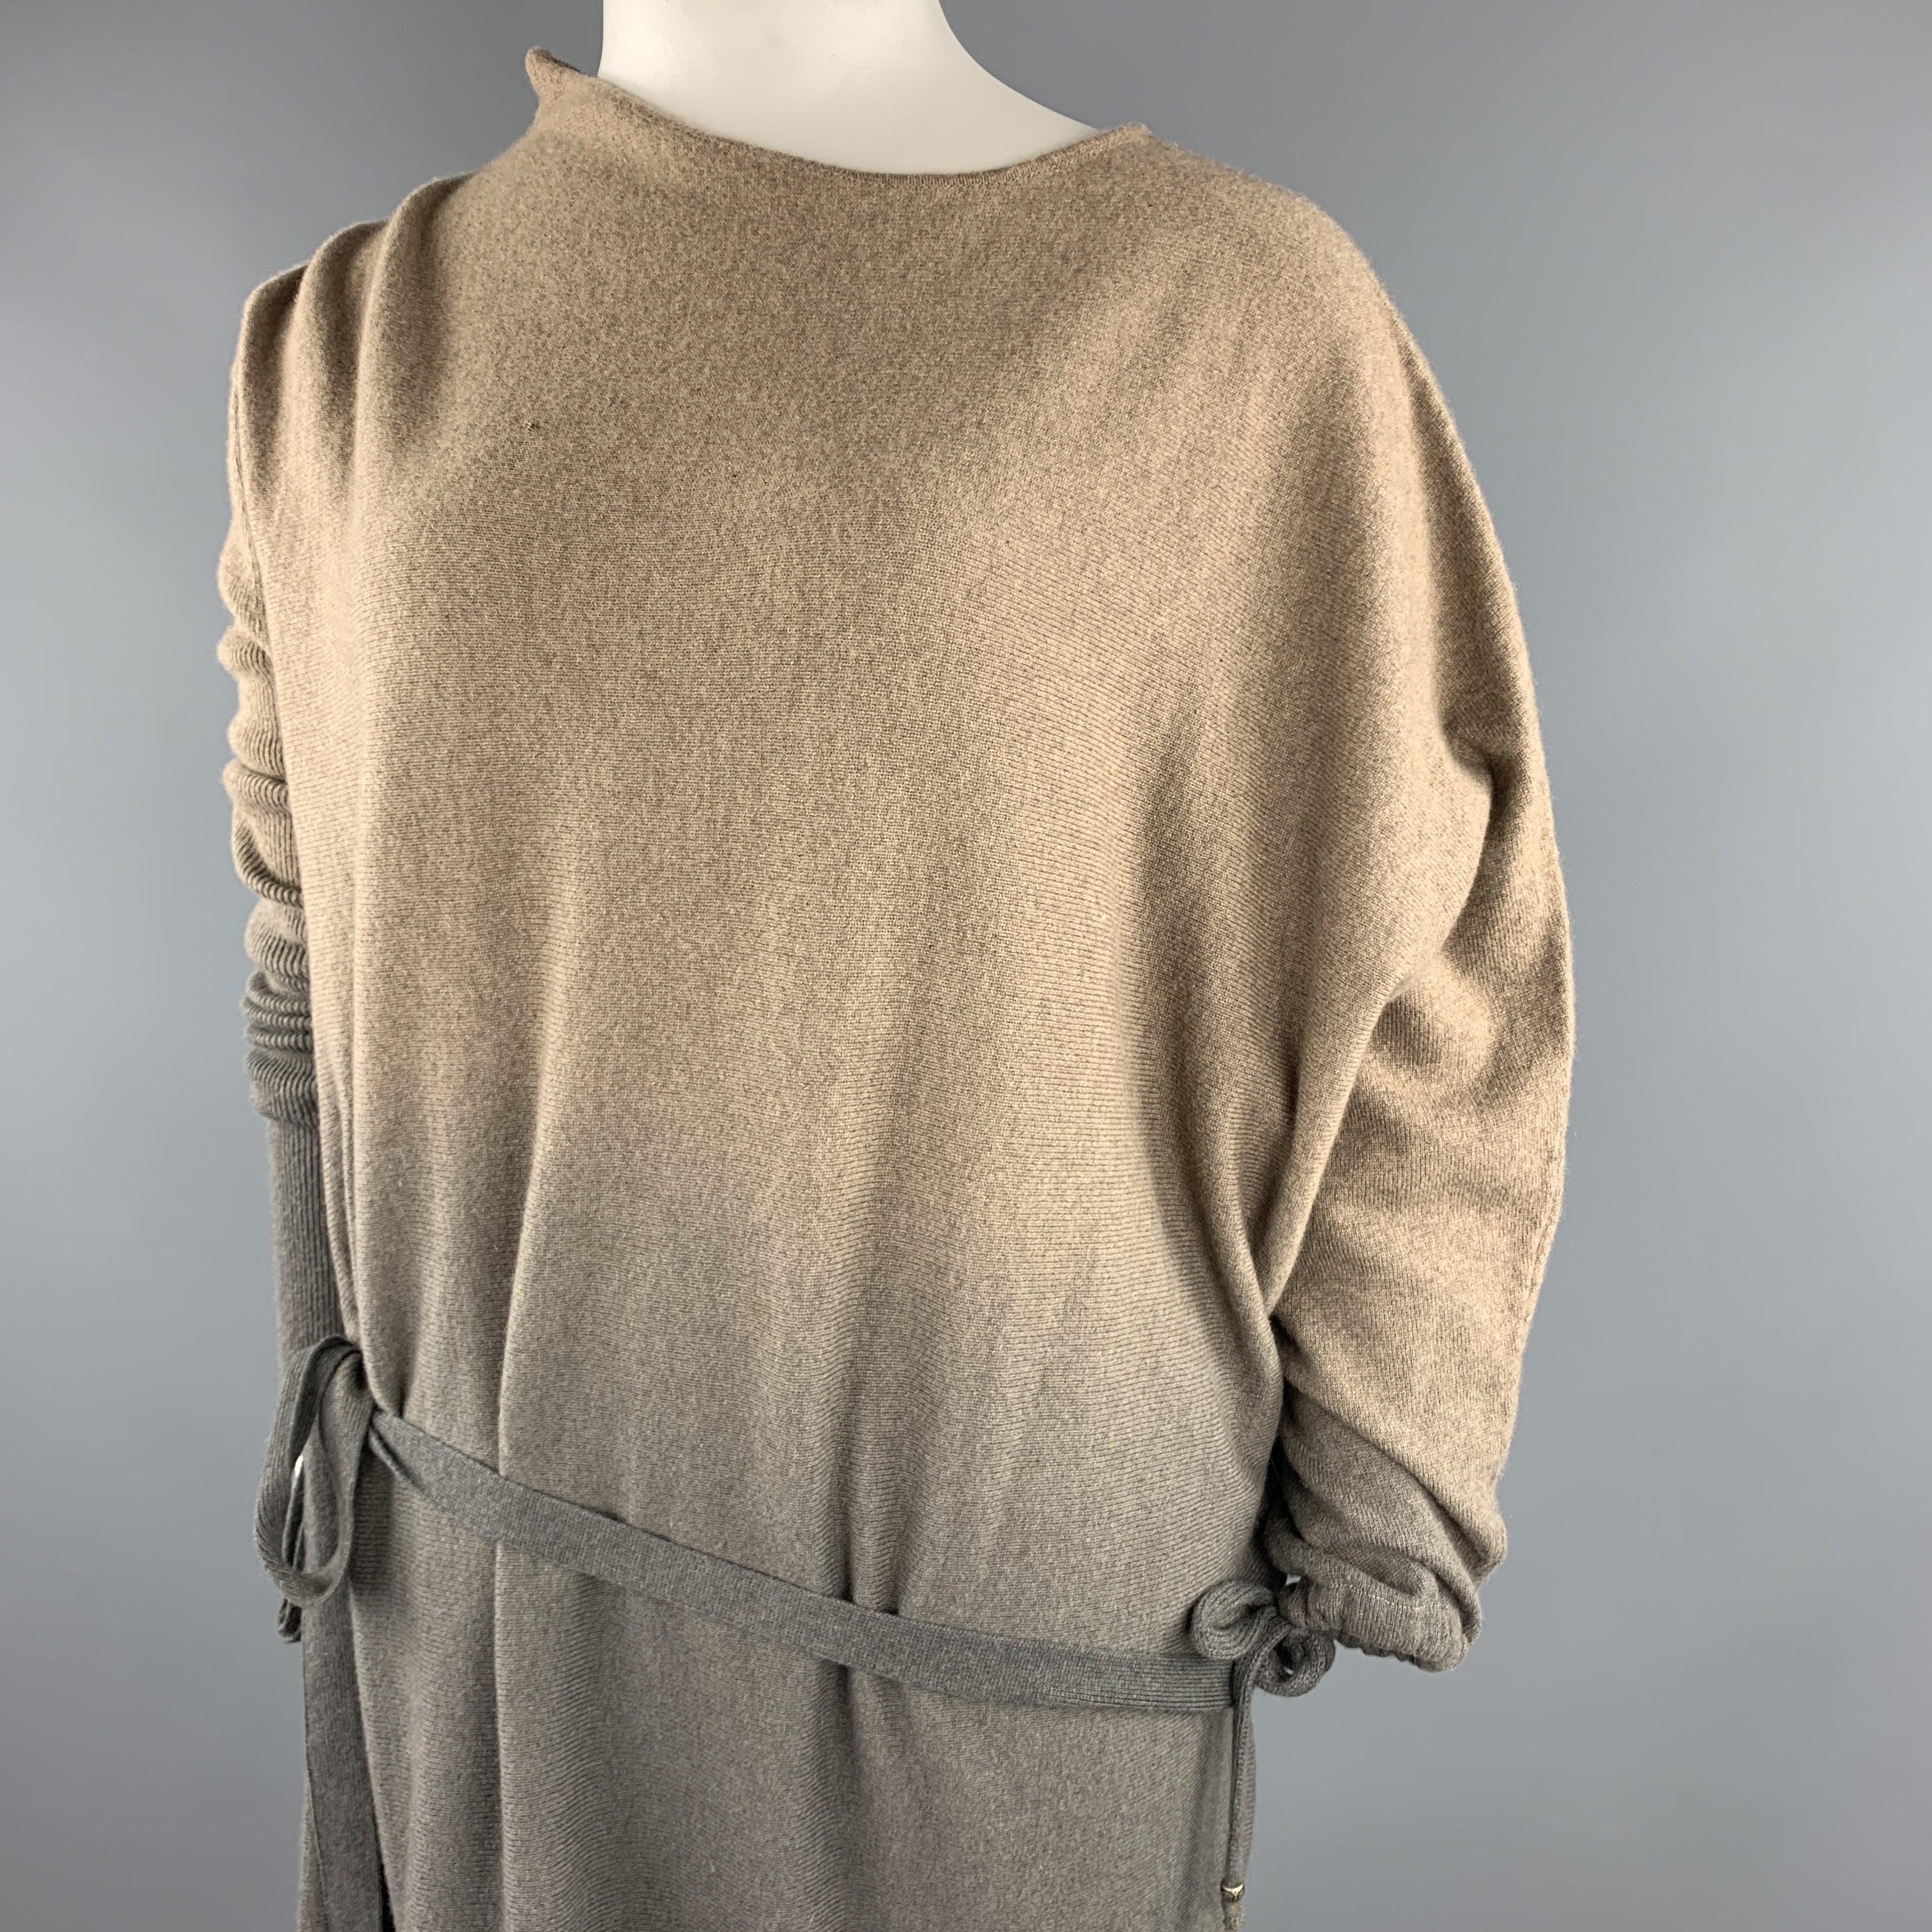 HENRY BEGUELIN sweater dress comes in tape cashmere knit with an all over ombre effect , asymmetrical design, tied drawstring cuff and belt. Made in Italy.Very Good
Pre-Owned Condition. 

Marked:   (no size) 

Measurements: 
 
Shoulder: 20 inches